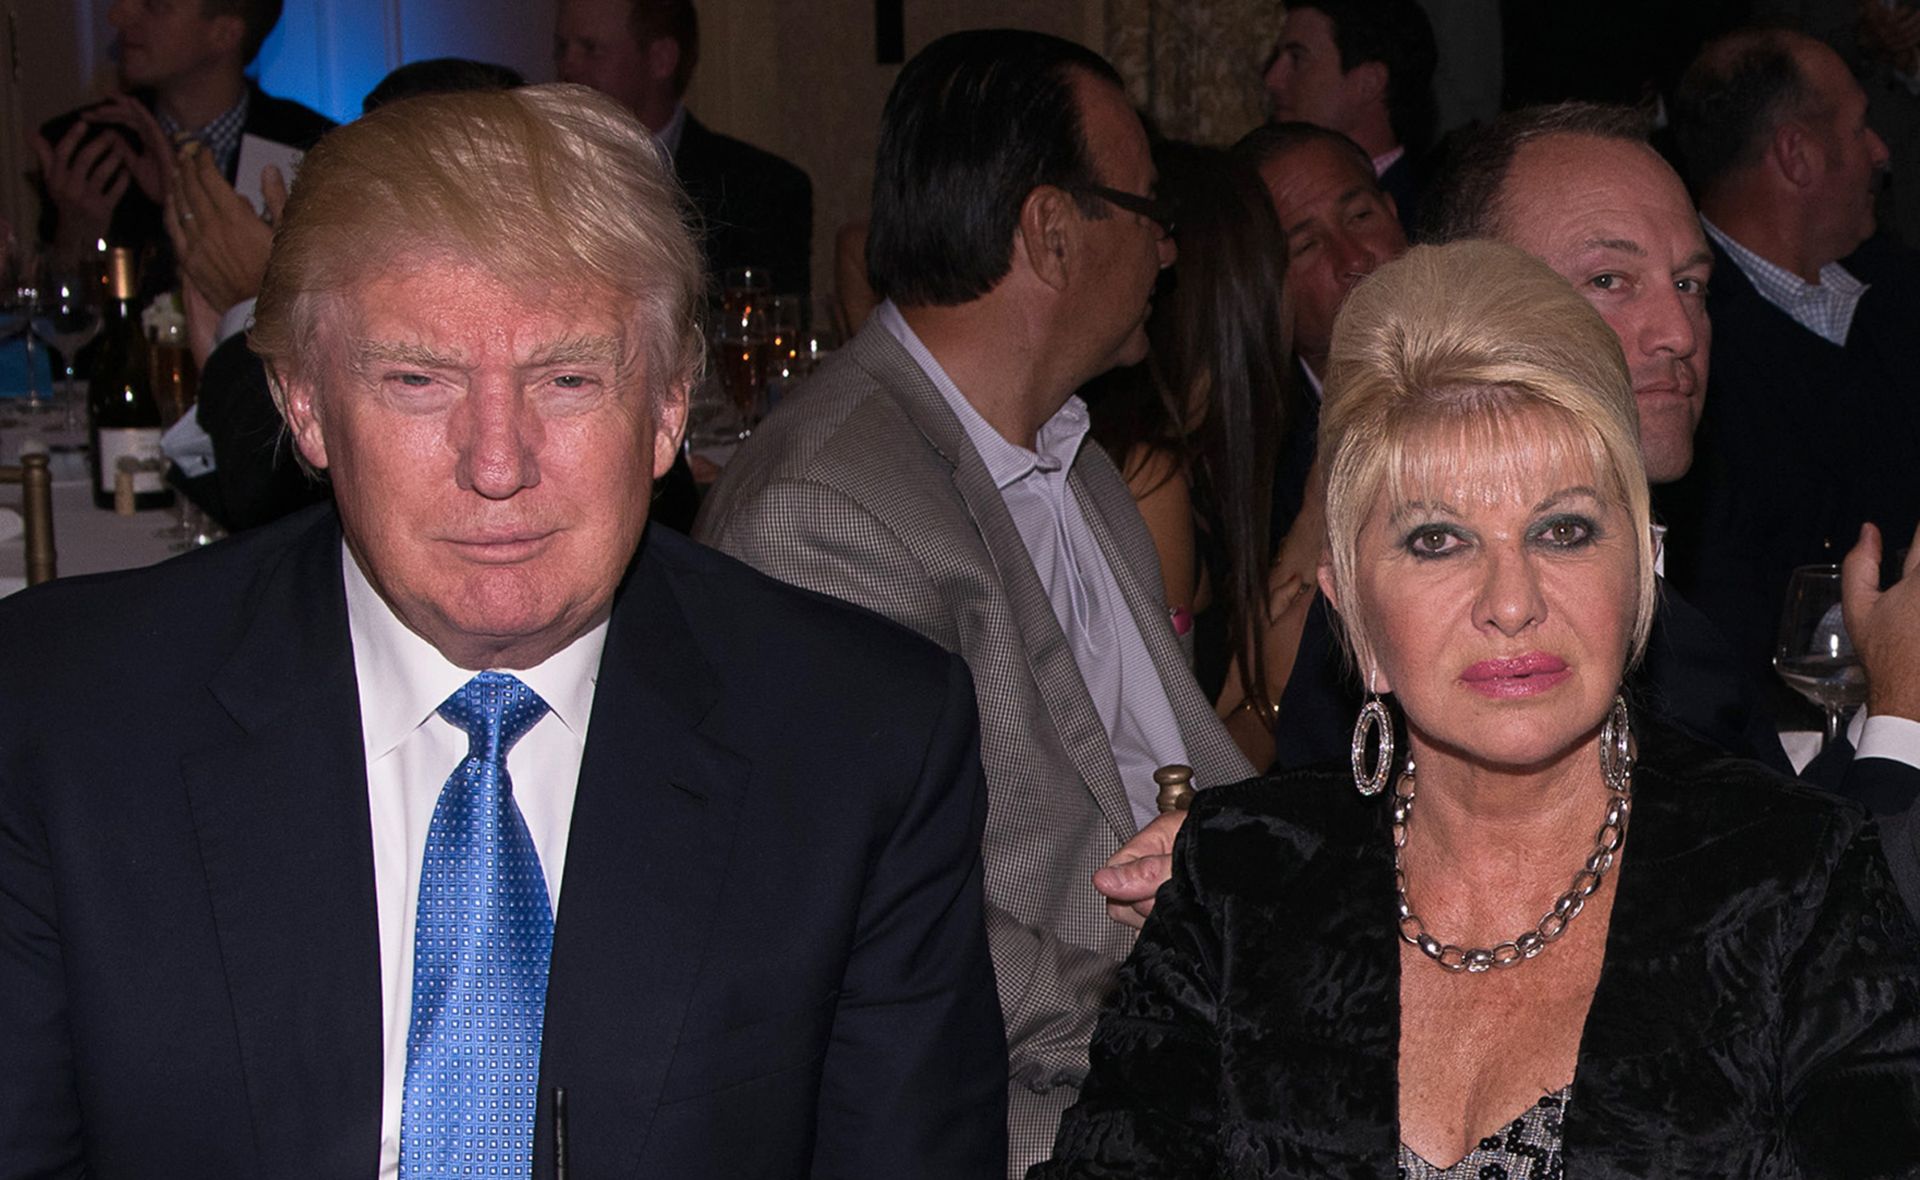 Donald Trump’s first wife Ivana Trump has died aged 73